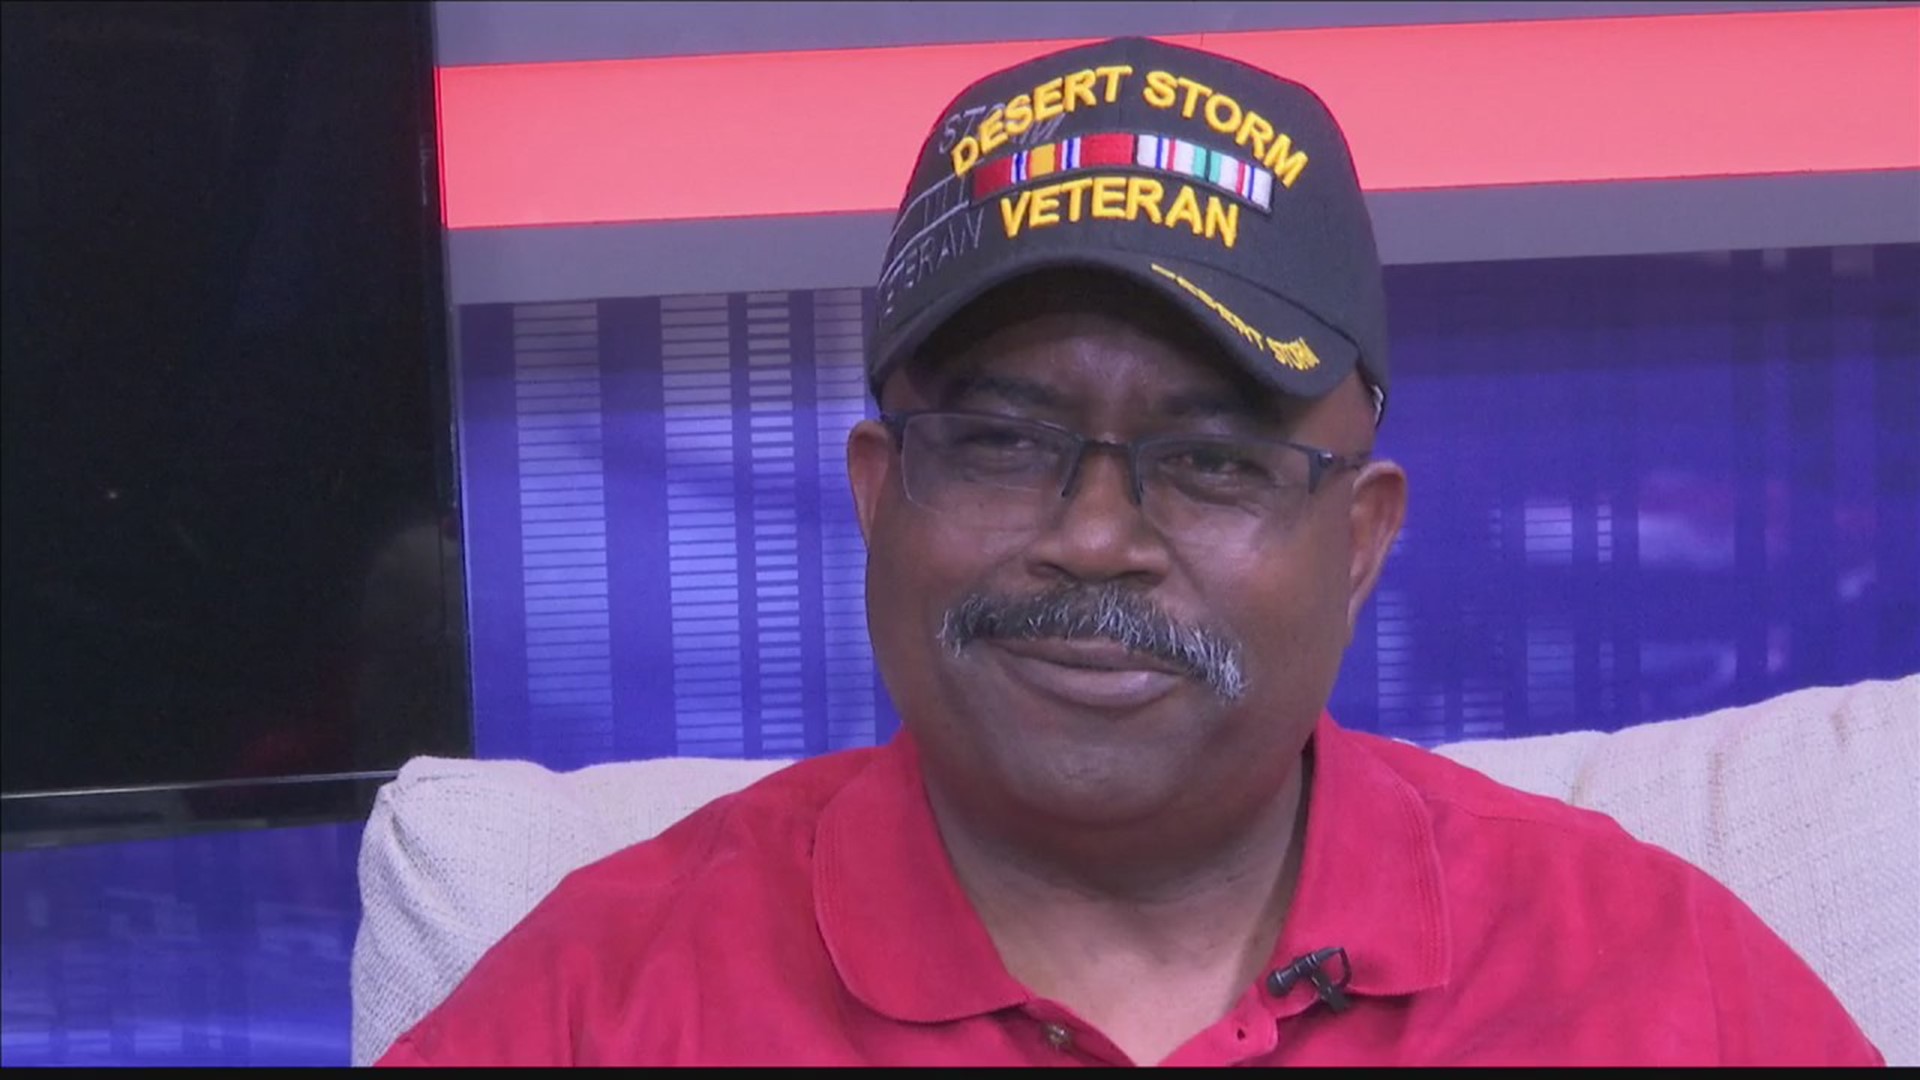 This week's "Salute to the Military" winner is Master Sergeant Frederick Moseley.